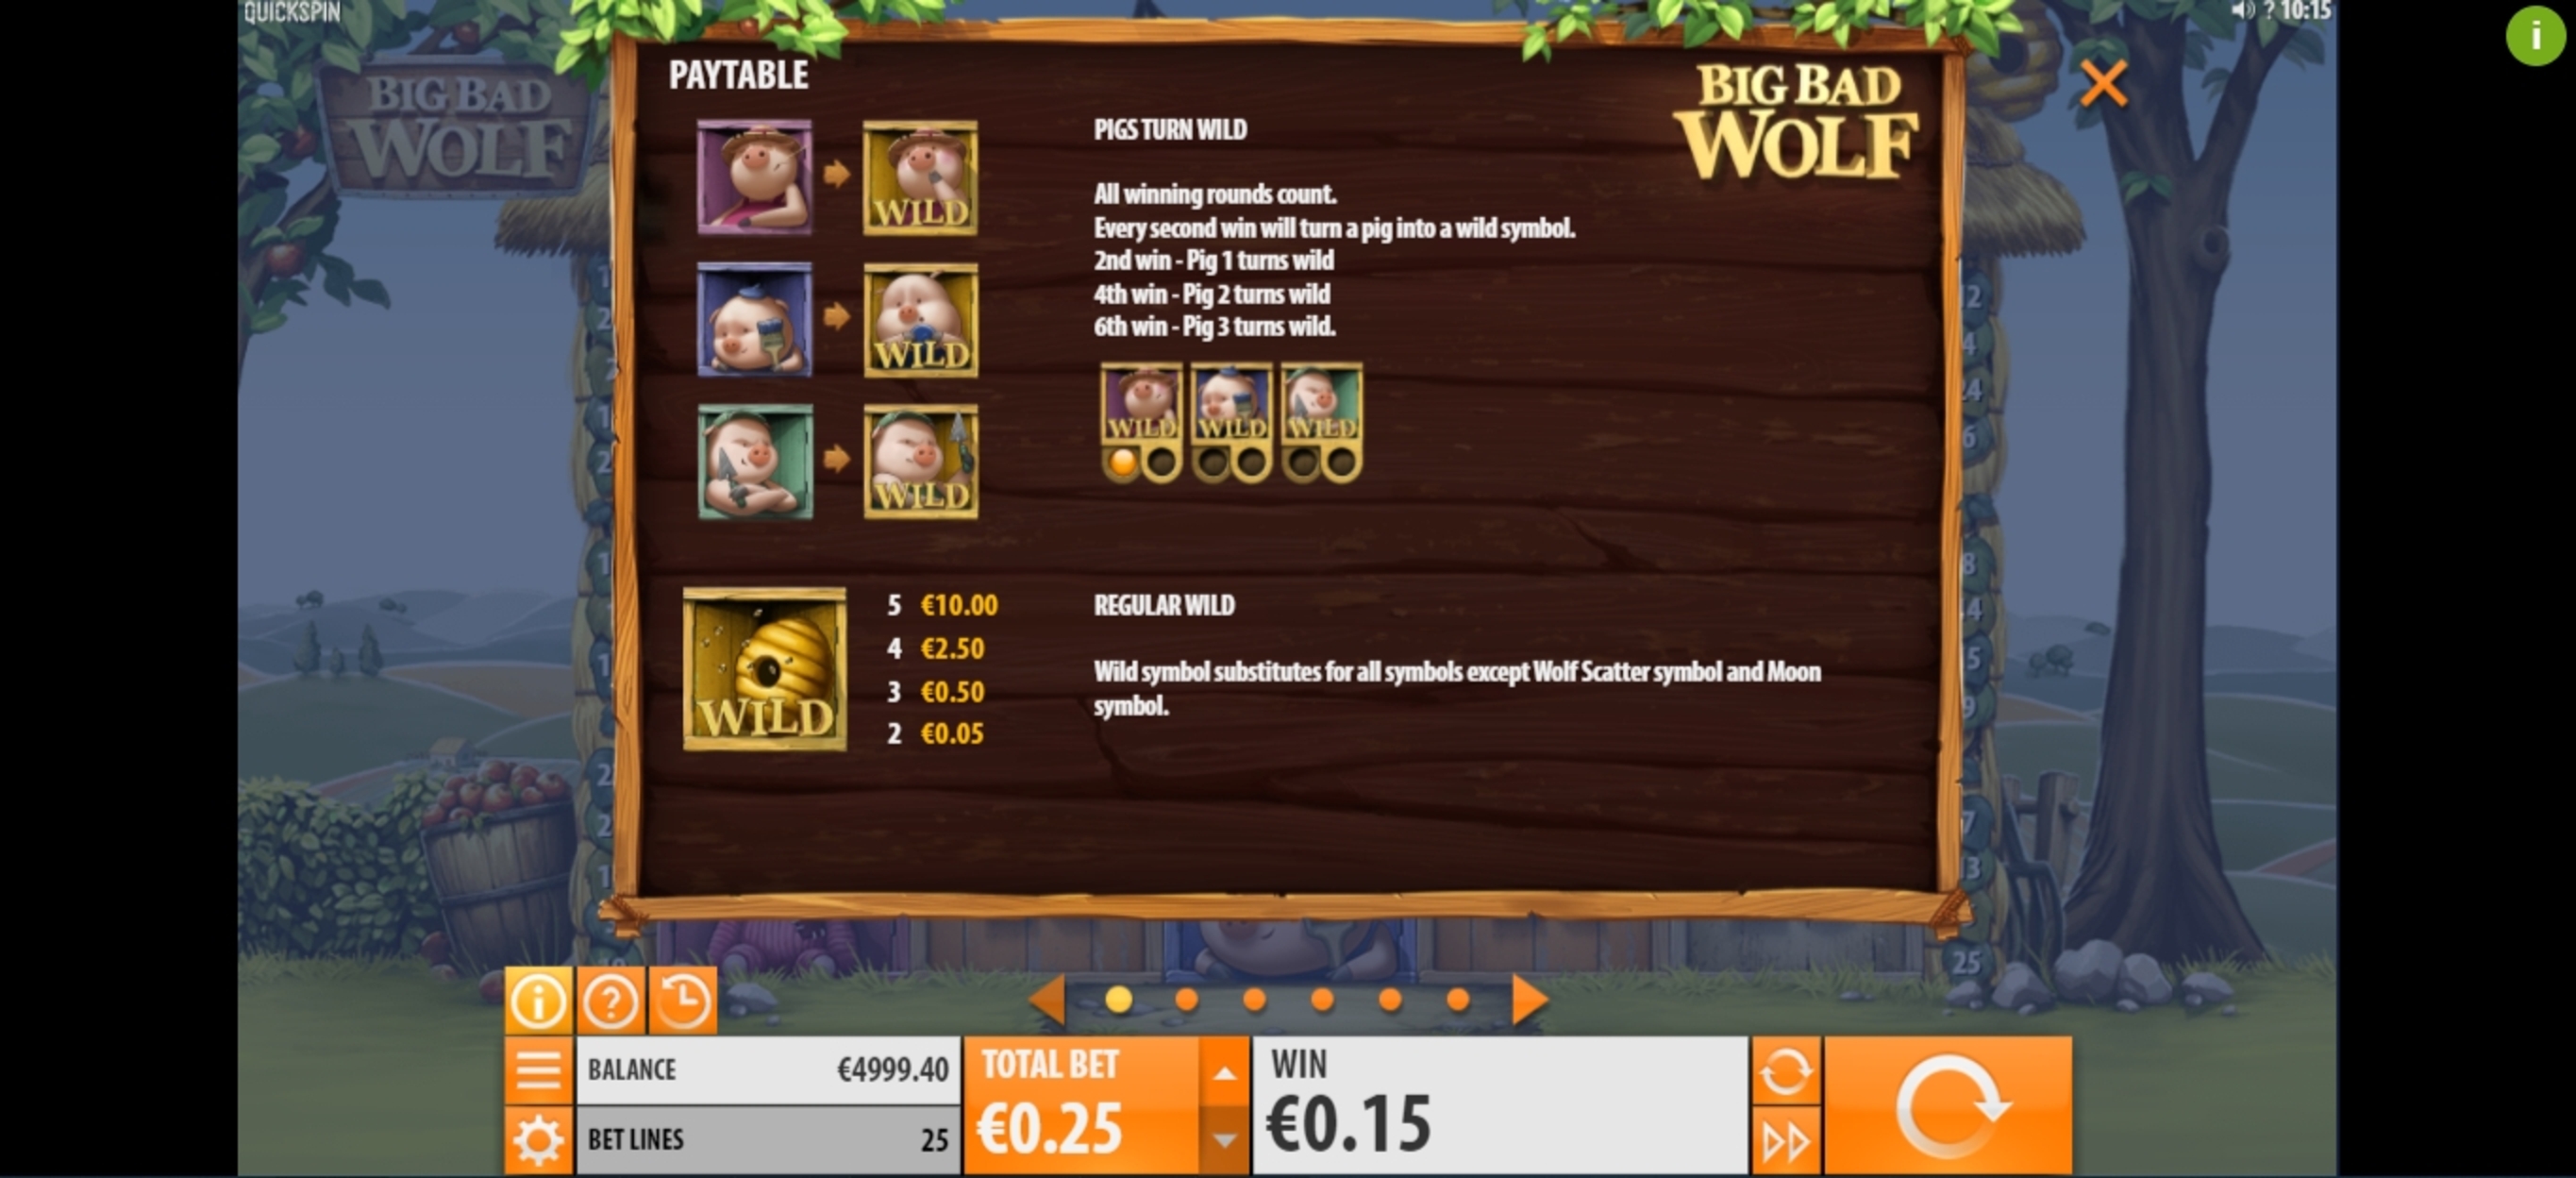 Info of Big Bad Wolf Slot Game by Quickspin